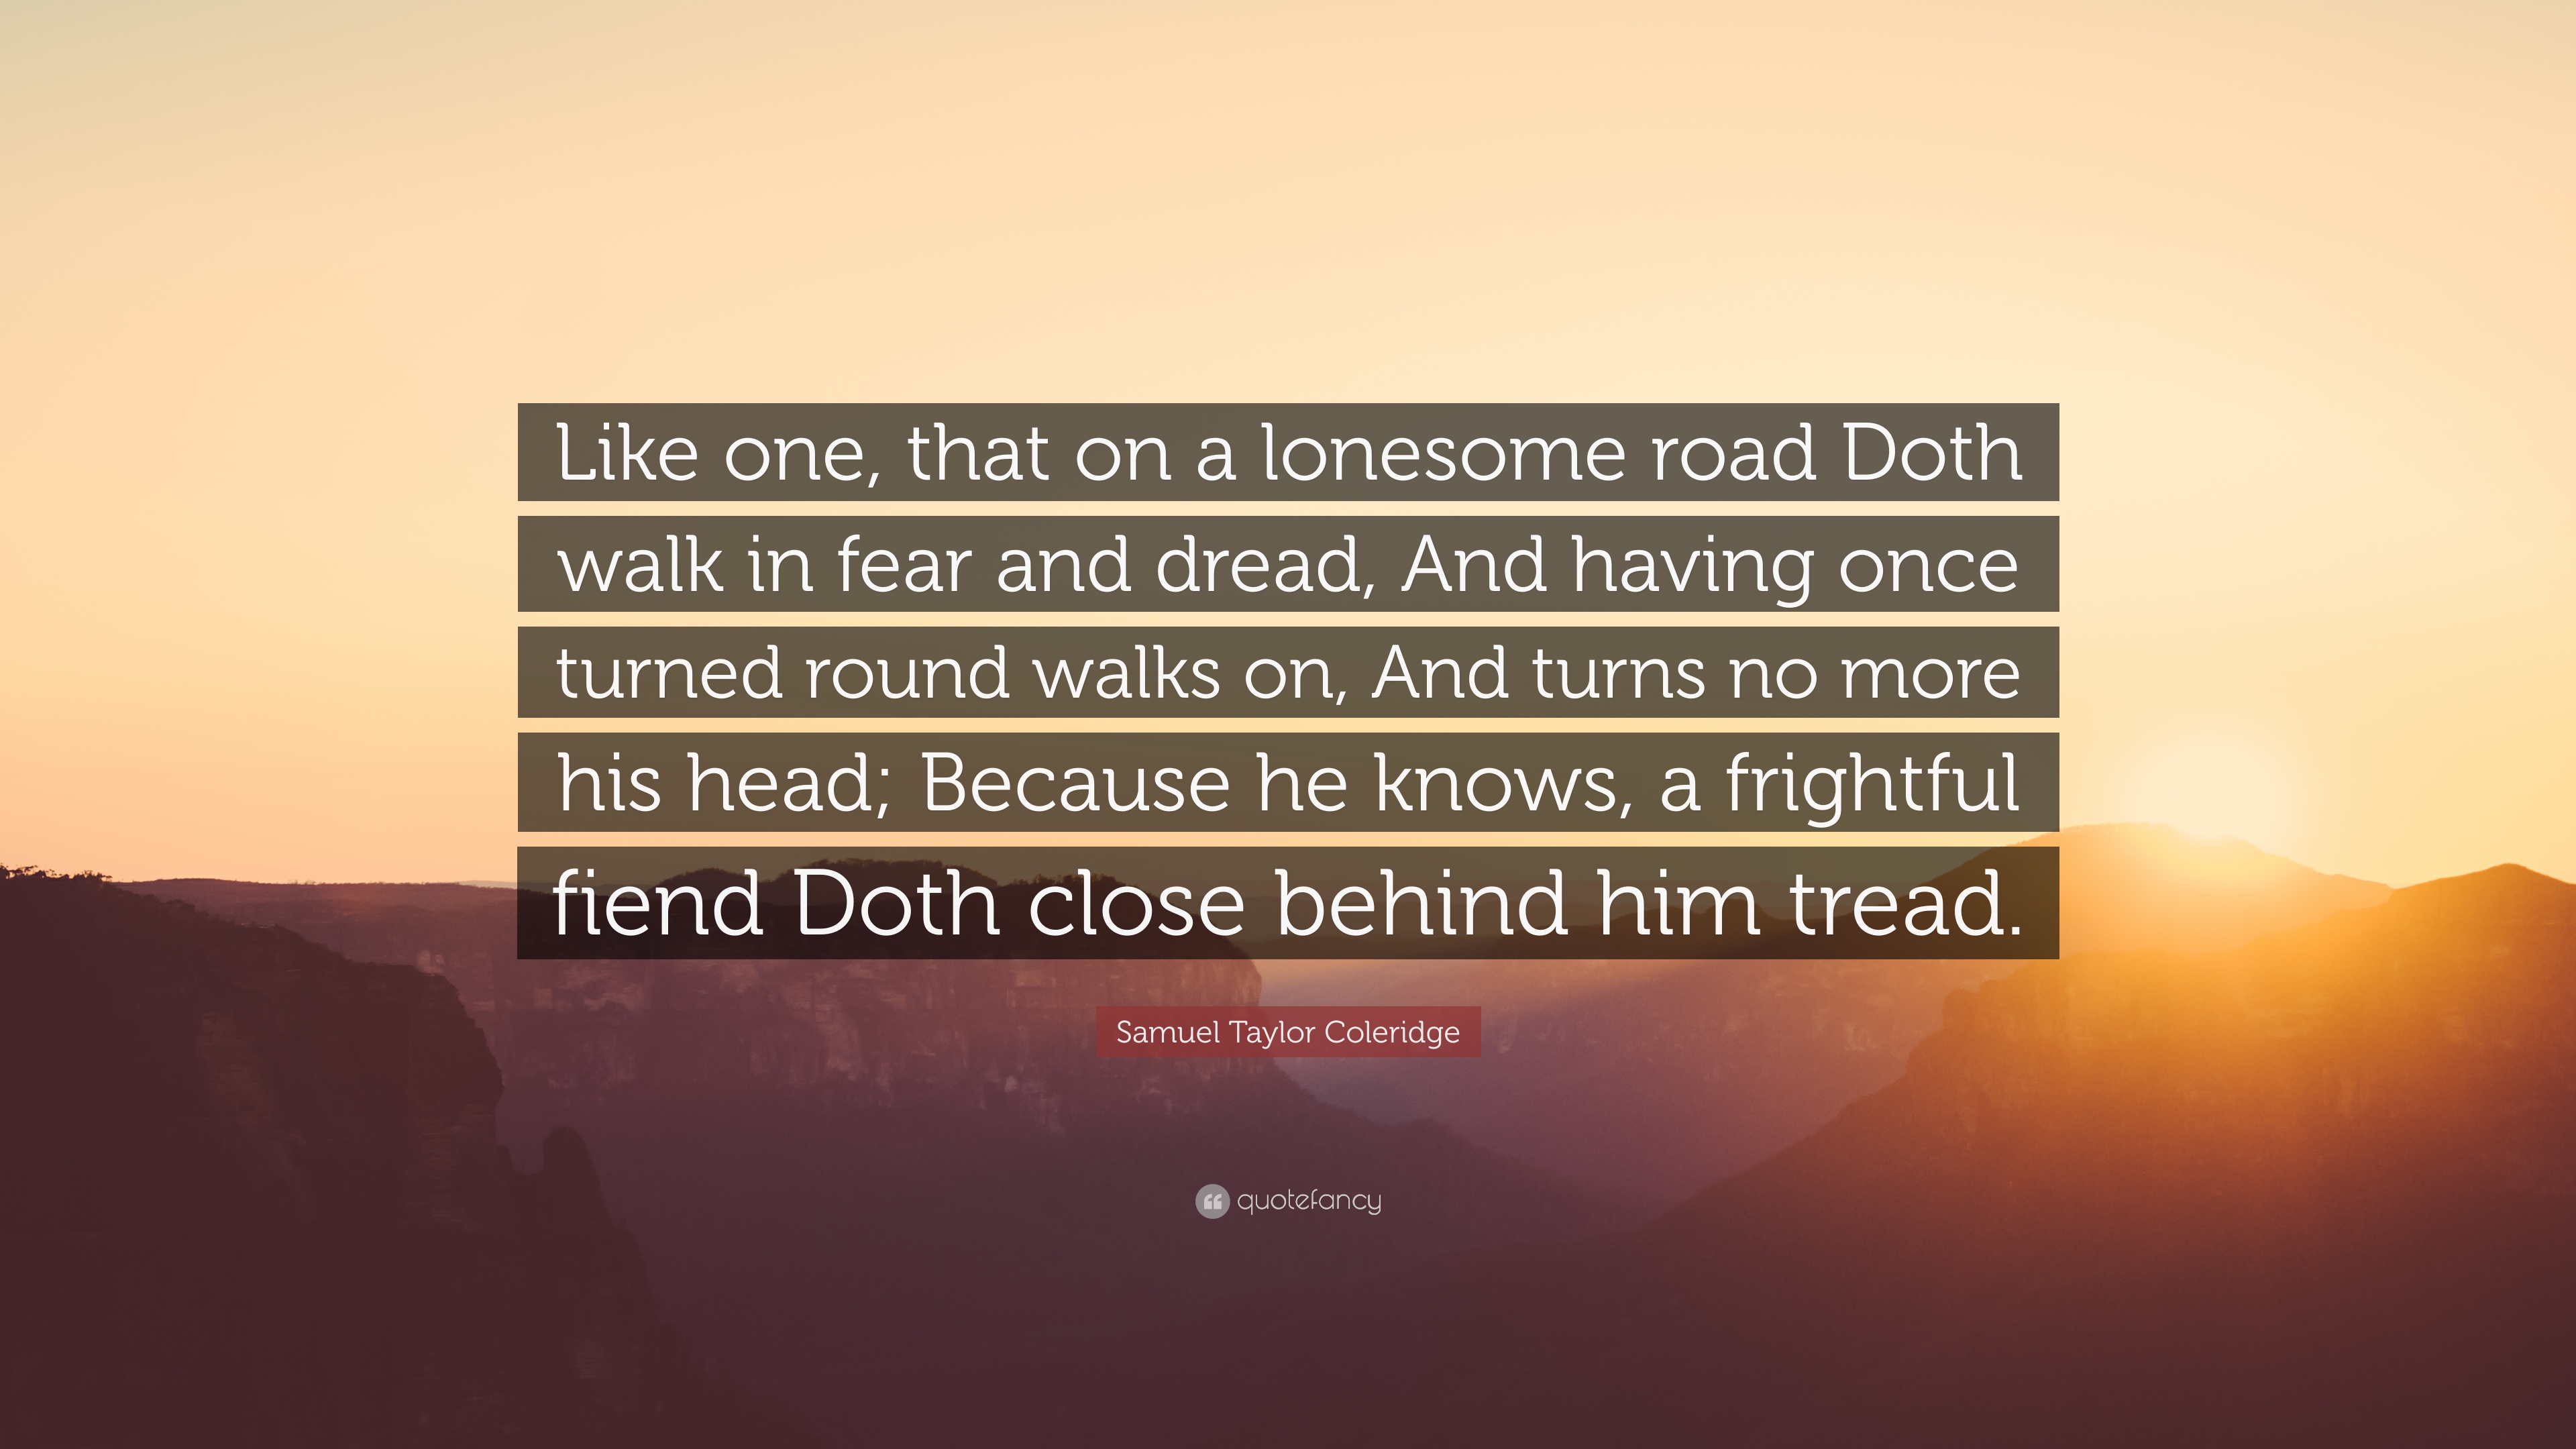 Samuel Taylor Coleridge Quote: “Like one, that on a lonesome road ...